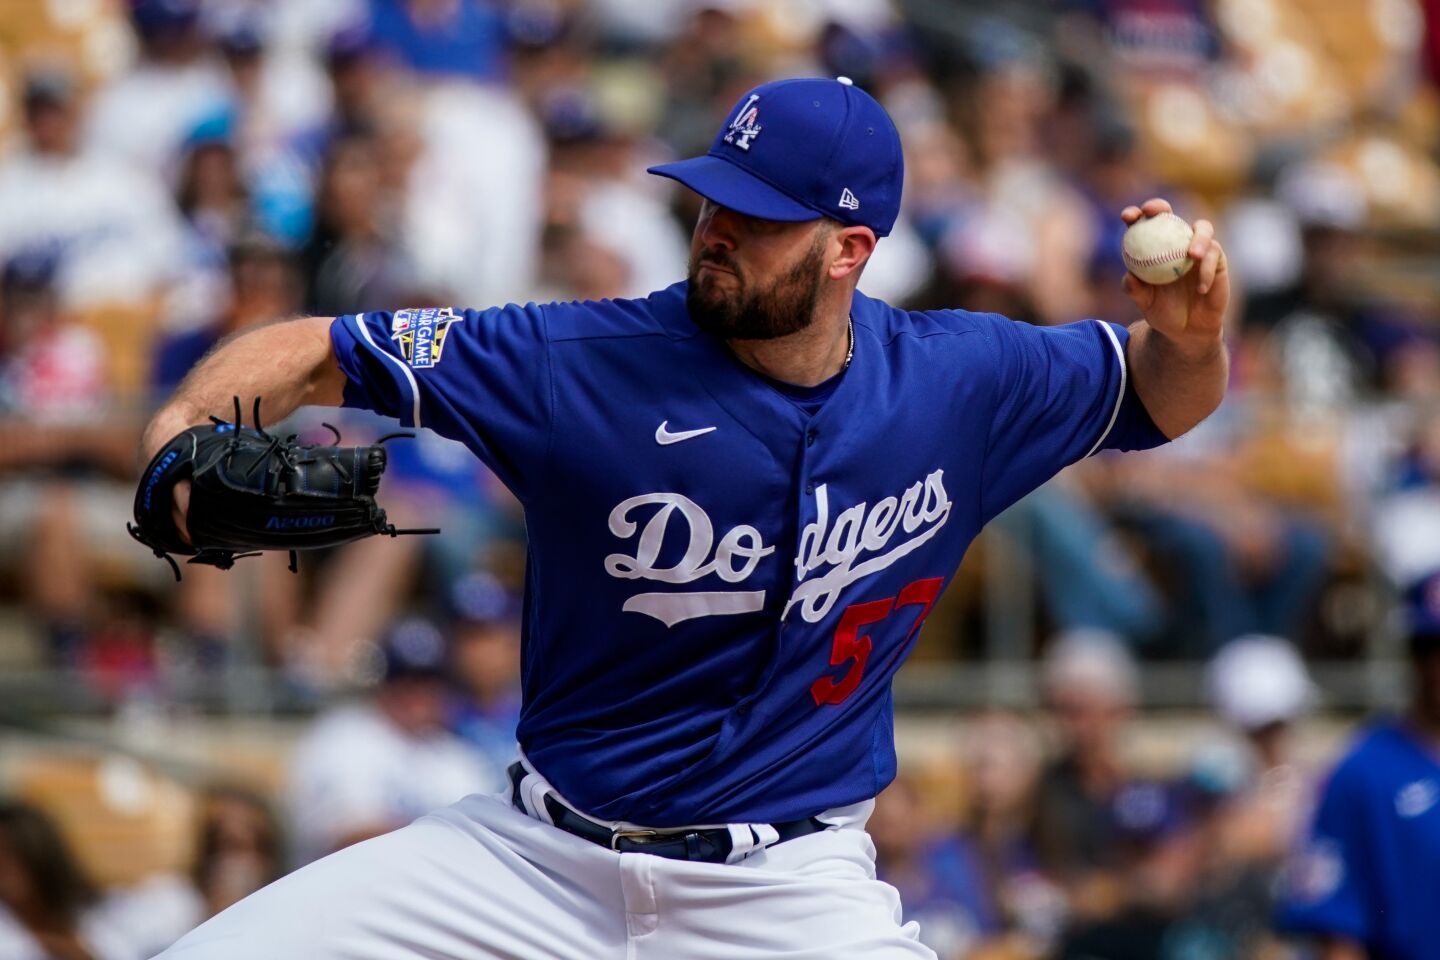 Dodgers starting pitcher Alex Wood delivers during a spring training exhibition game against the Chicago Cubs at Camelback Ranch on Feb. 23, 2020.